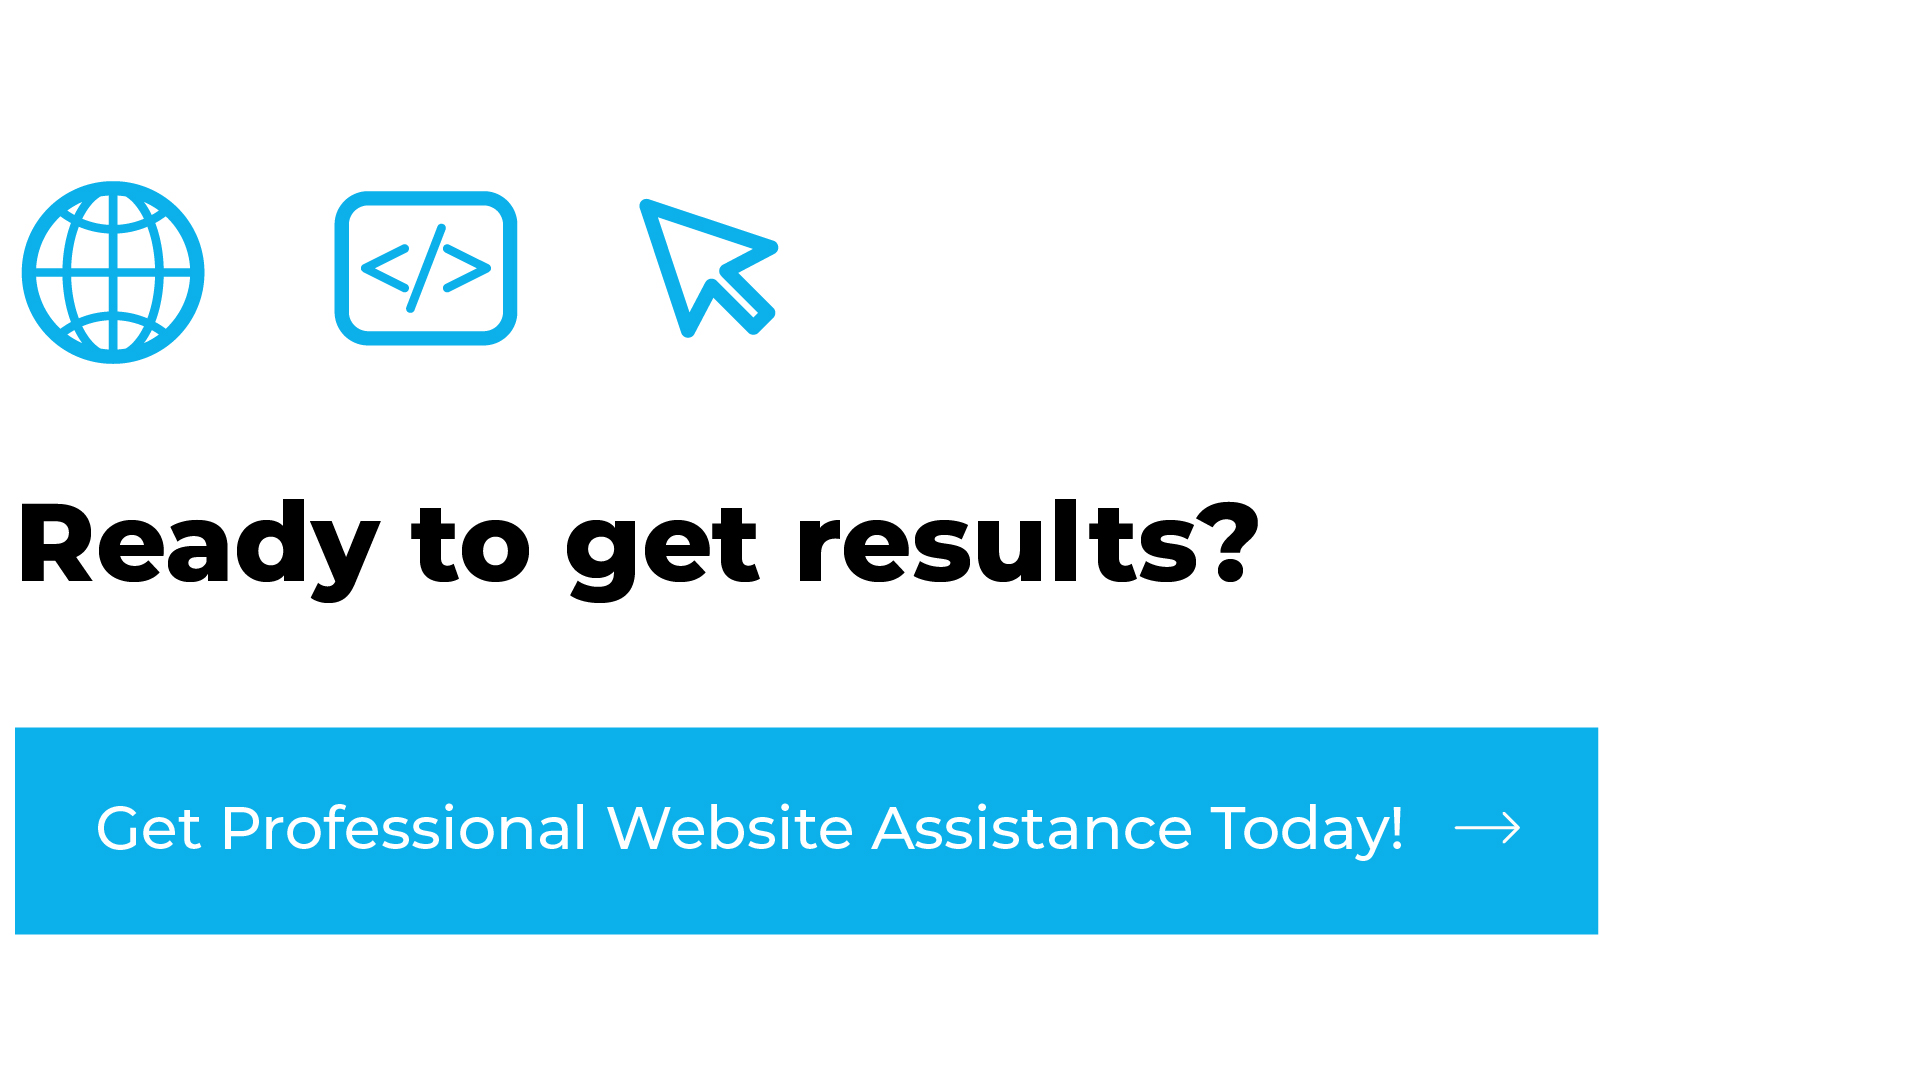 Get Professional Website Assistance Today